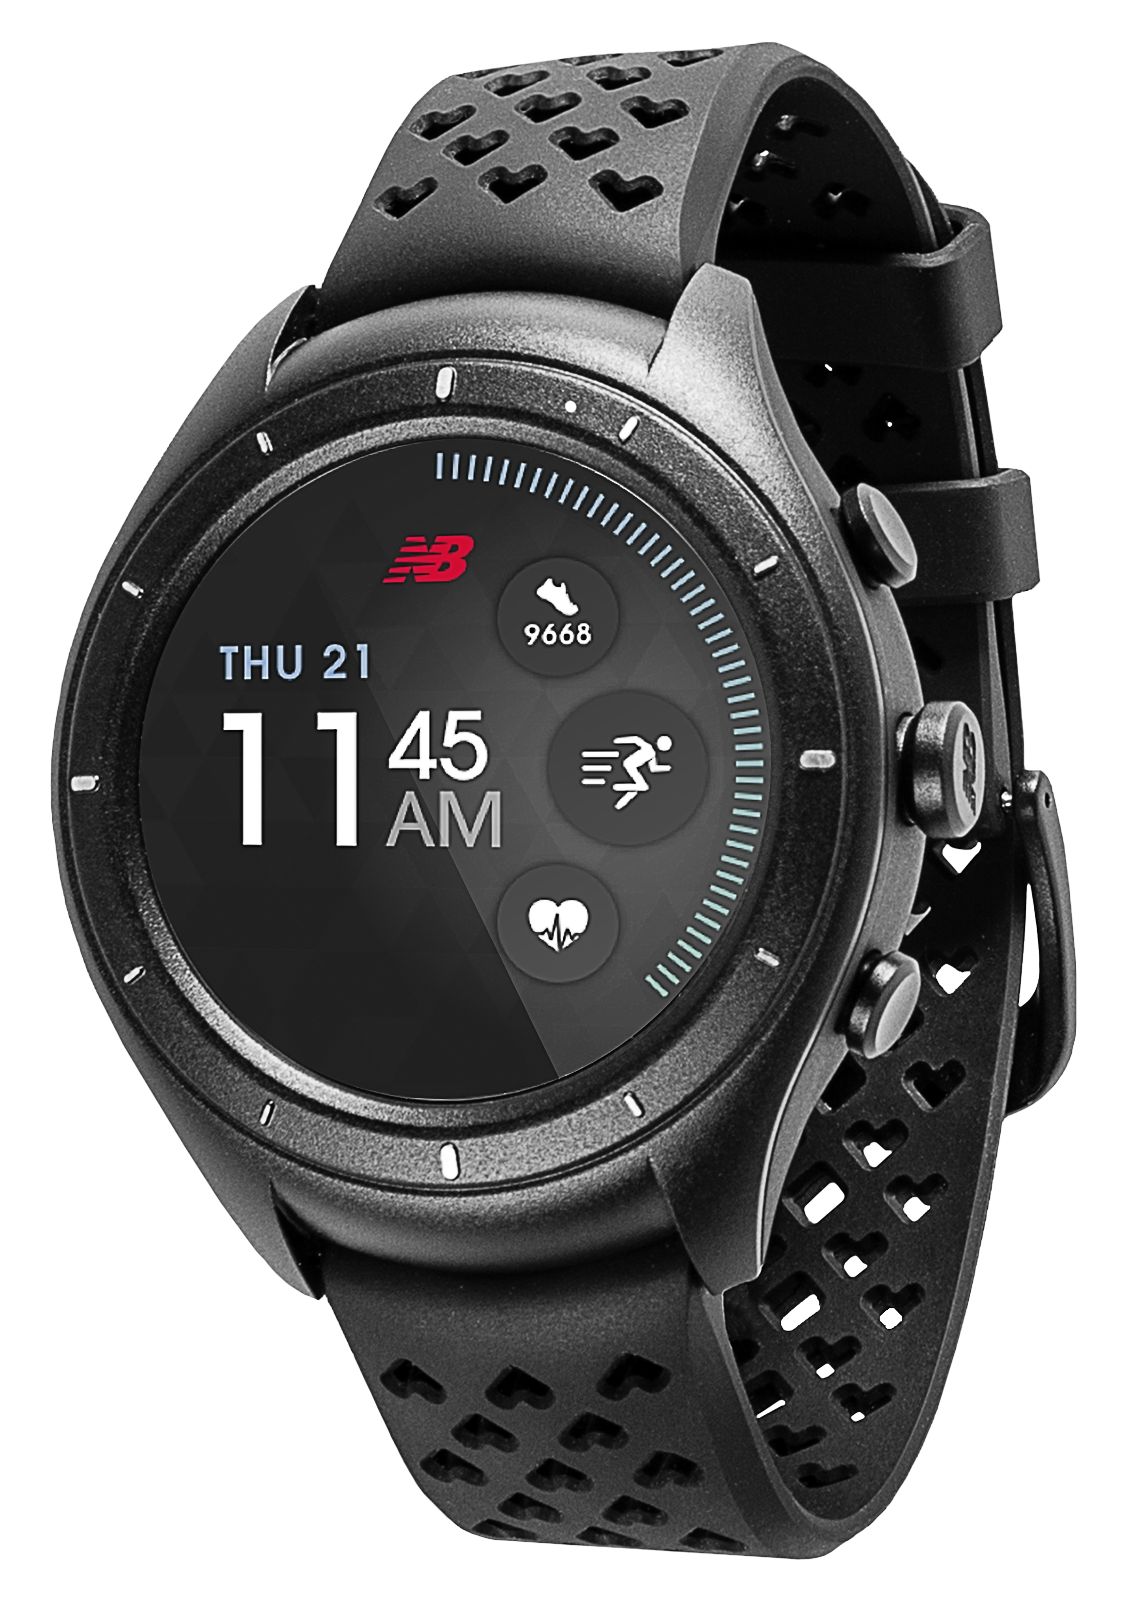 New Balance's 'RunIQ' is the Android Wear smartwatch that has a GPS tracker  to track your course and pace, bring your music along, monitor your heart  rate and even receive and reply